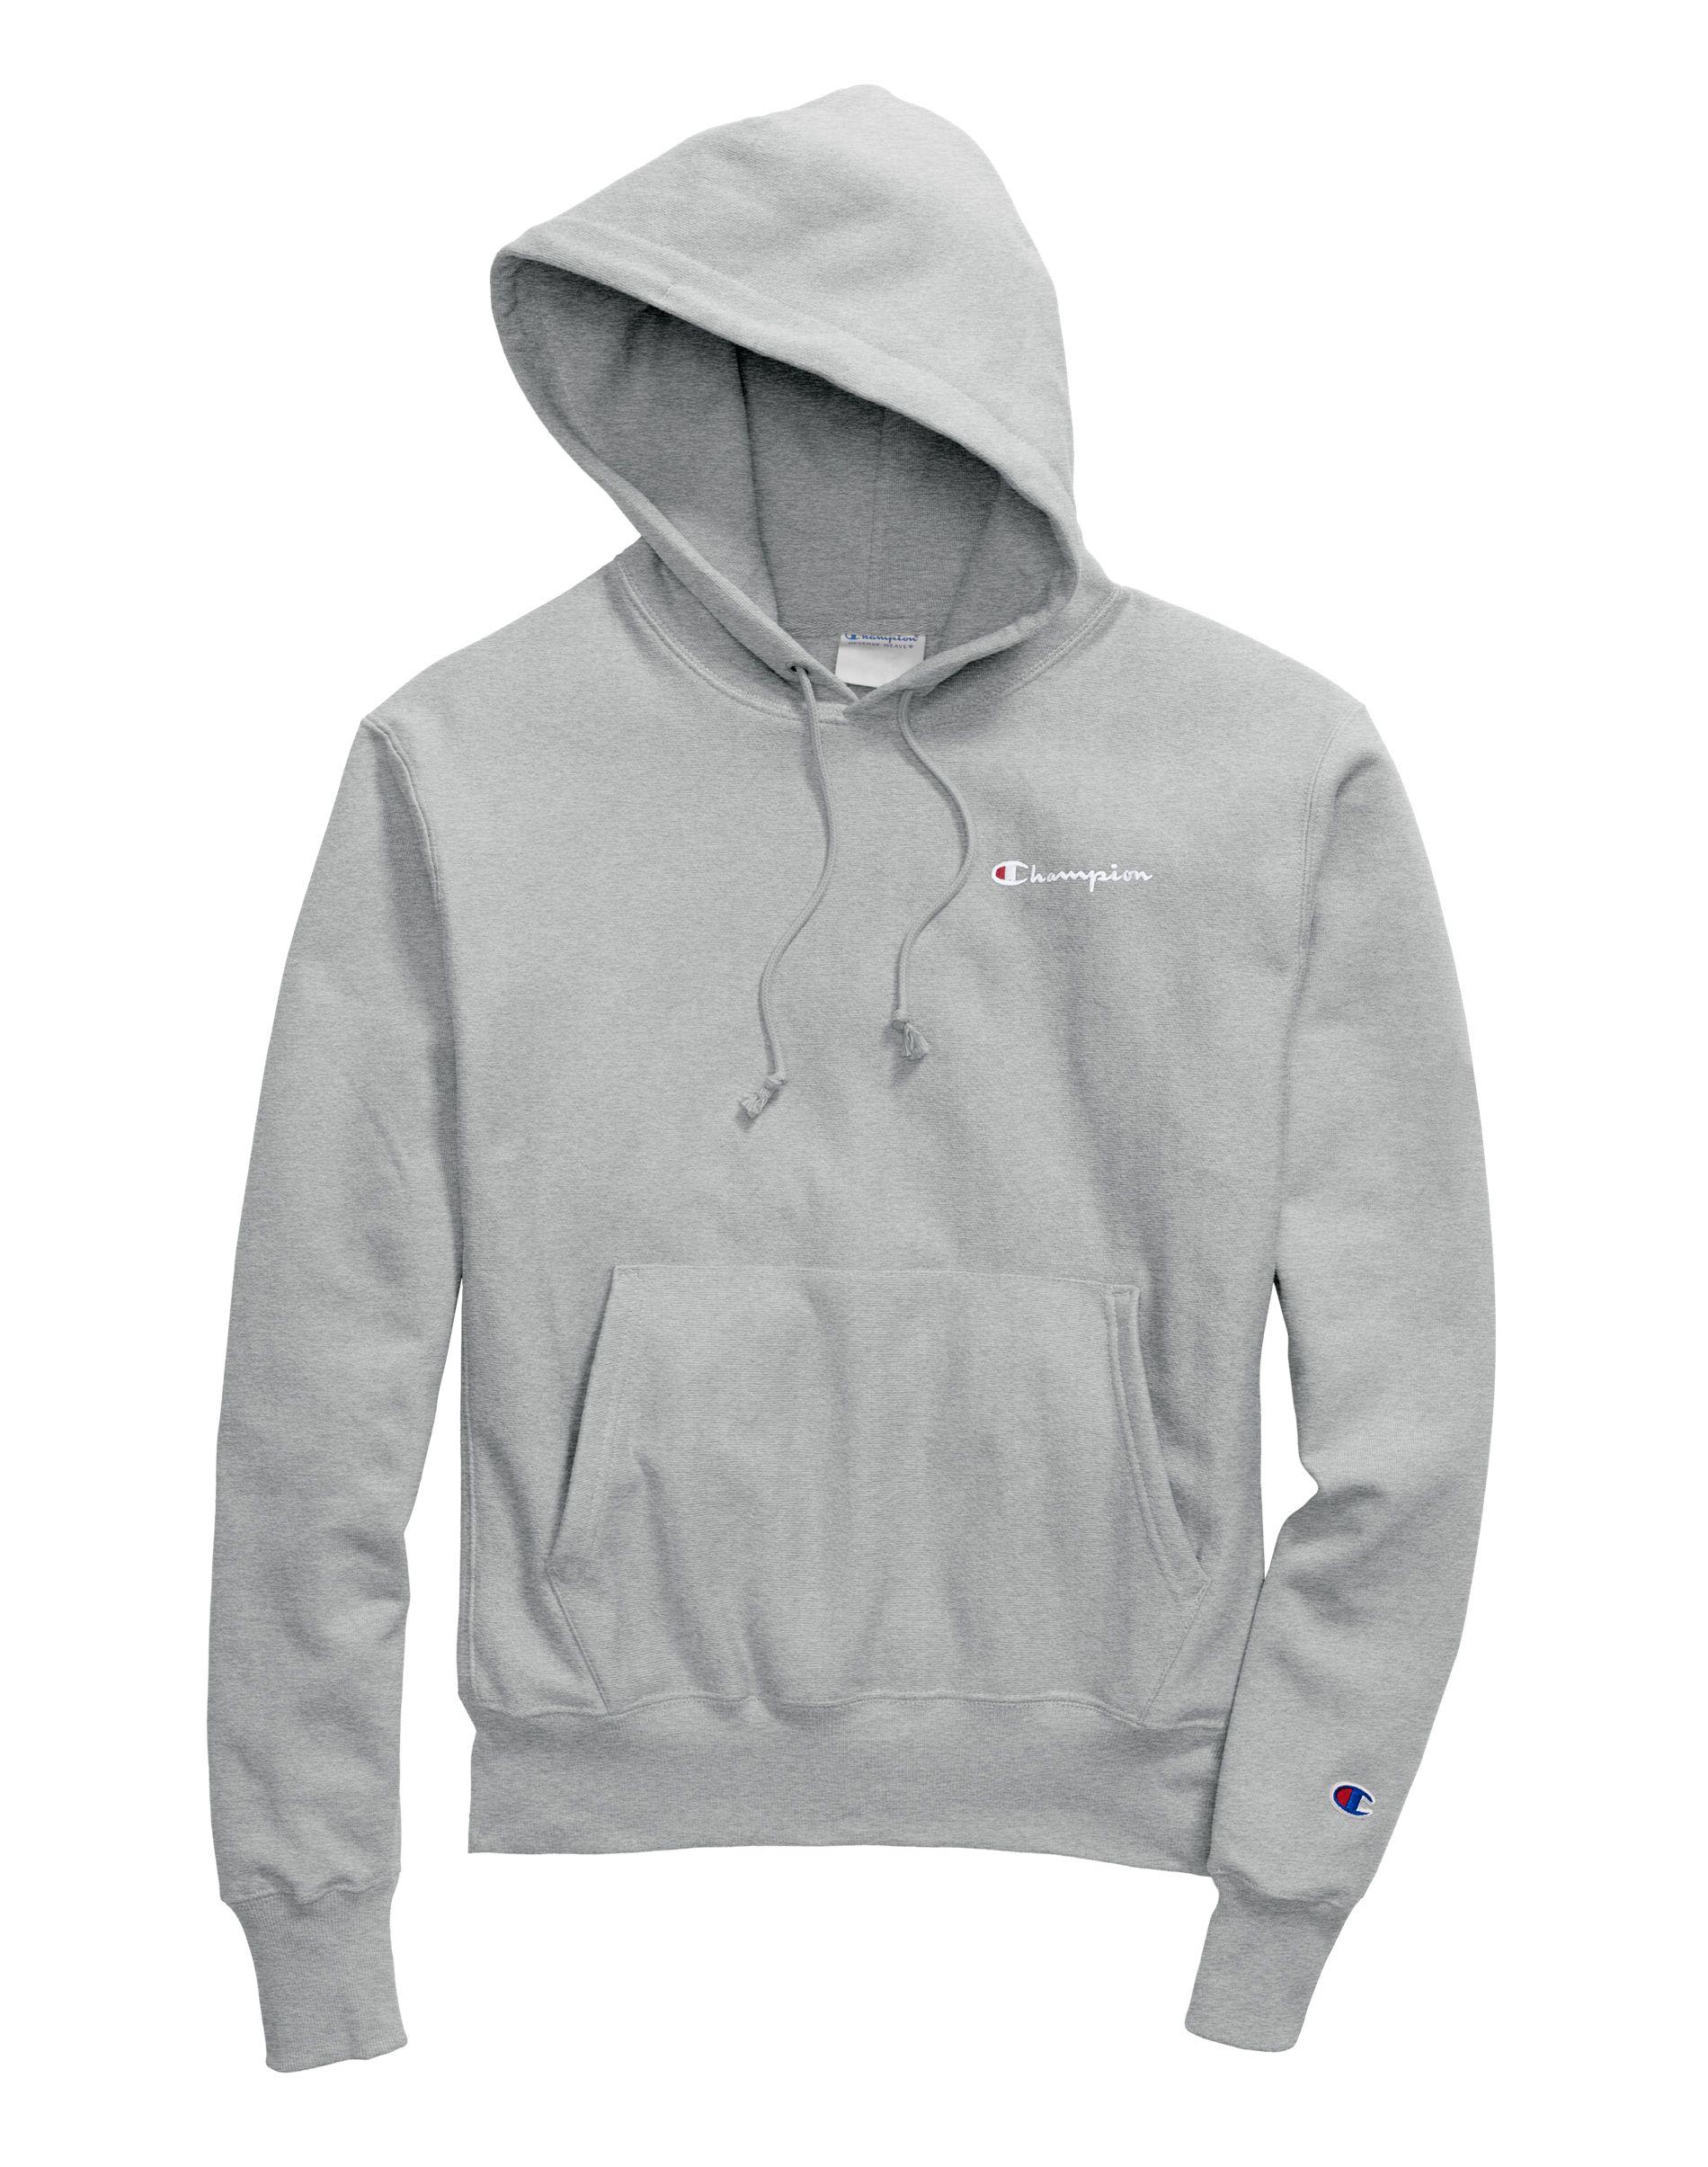 Hoodie, logo champion embroidered 